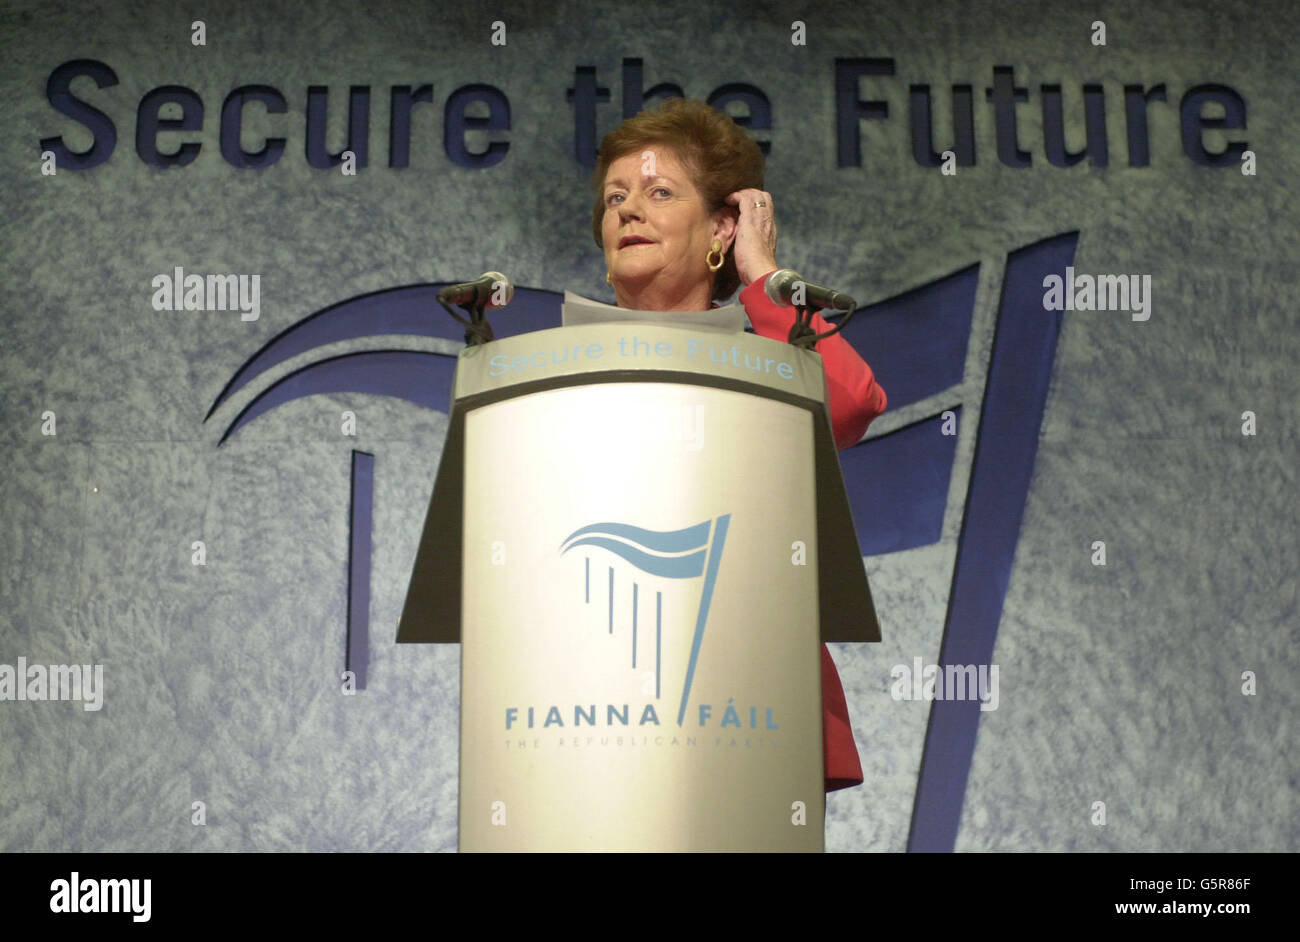 Mary O'Rourke T.D for Westmeath in the Republic of Ireland speaking at a workshop for Public Enterprise at the two-day annual conference for the Fianna Fail party at the Citywest Hotel and Conference Centre near Dublin. Stock Photo